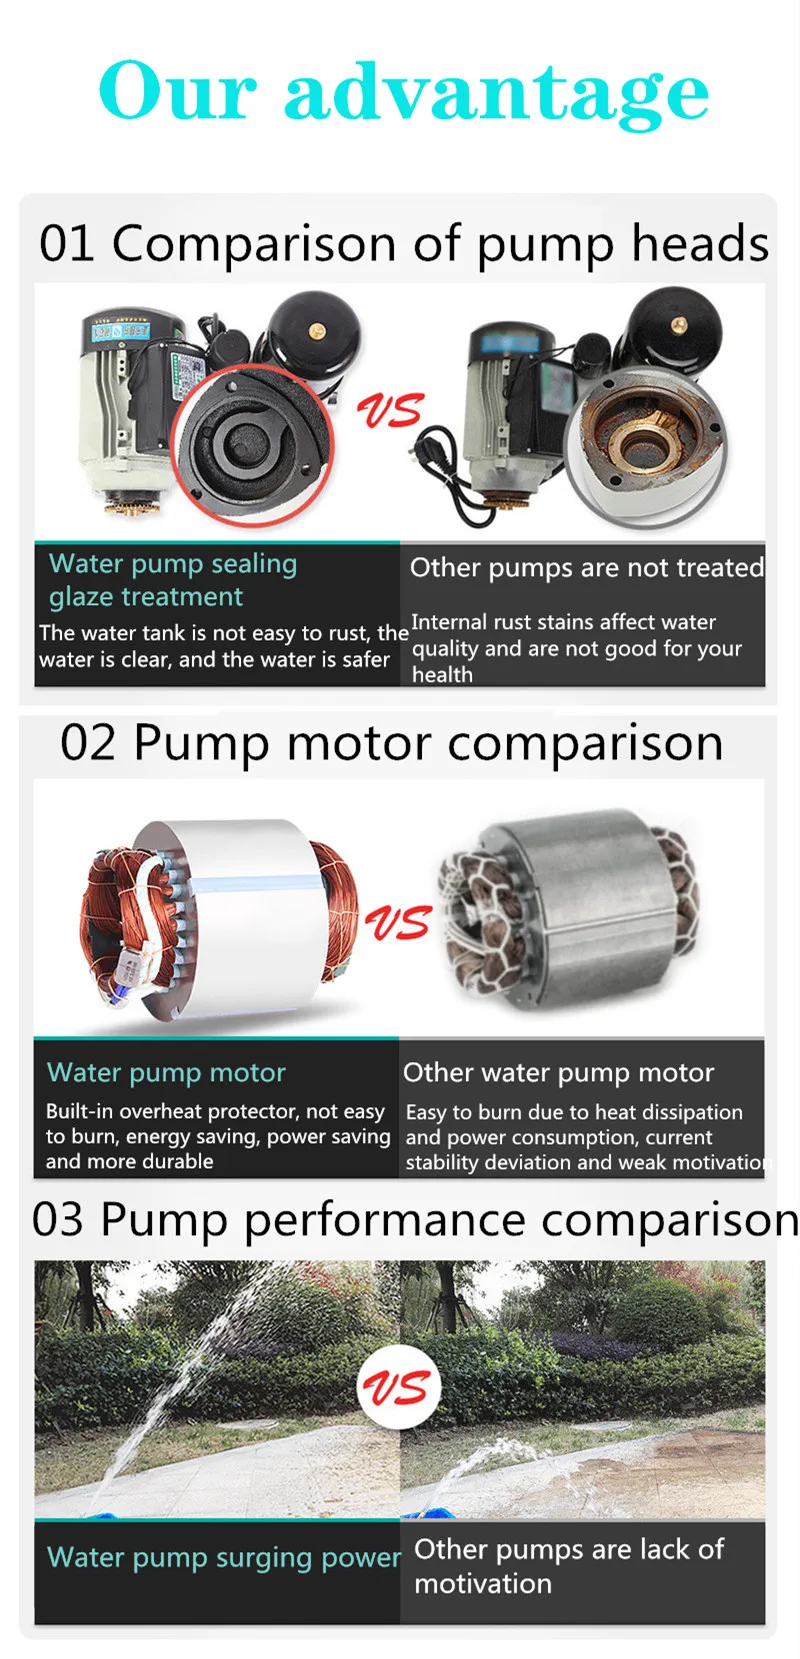 Household Automatic Self-Priming Water Booster Pump Pressure Control 220V Electric Self-priming Domestic Home pump